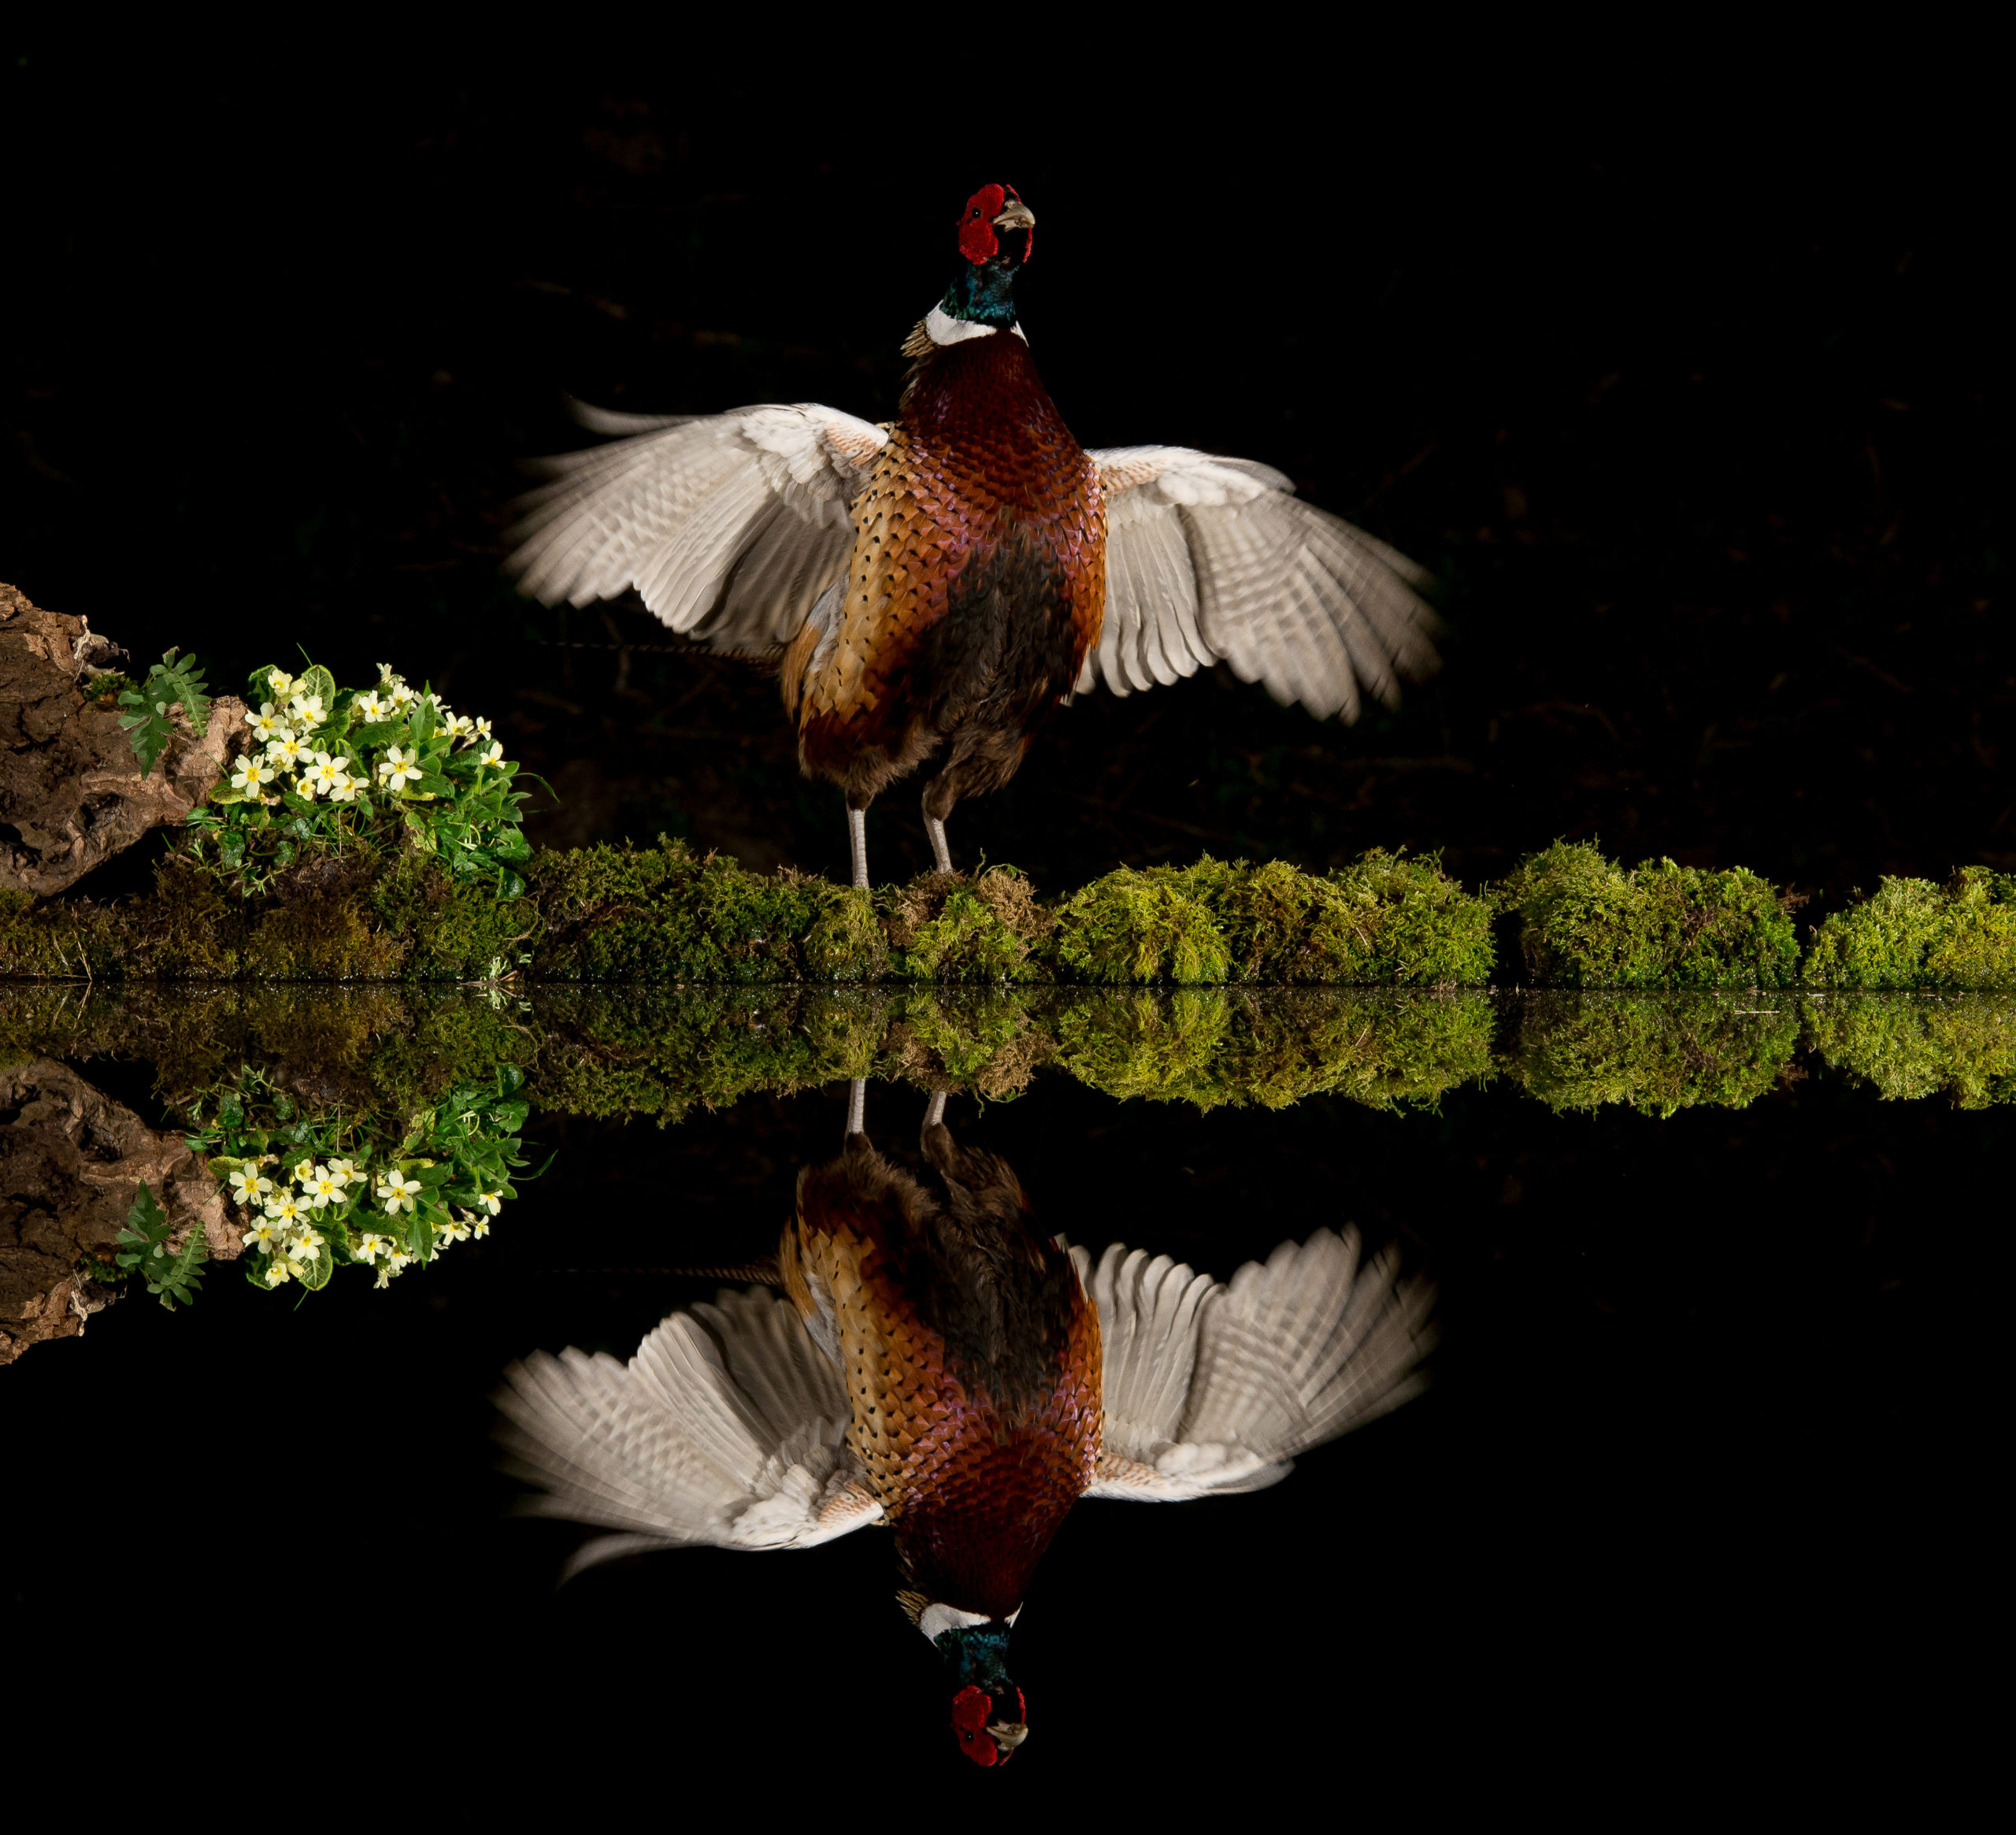 The stunning photographs show perfectly symmetrical reflection images. SWNS. 